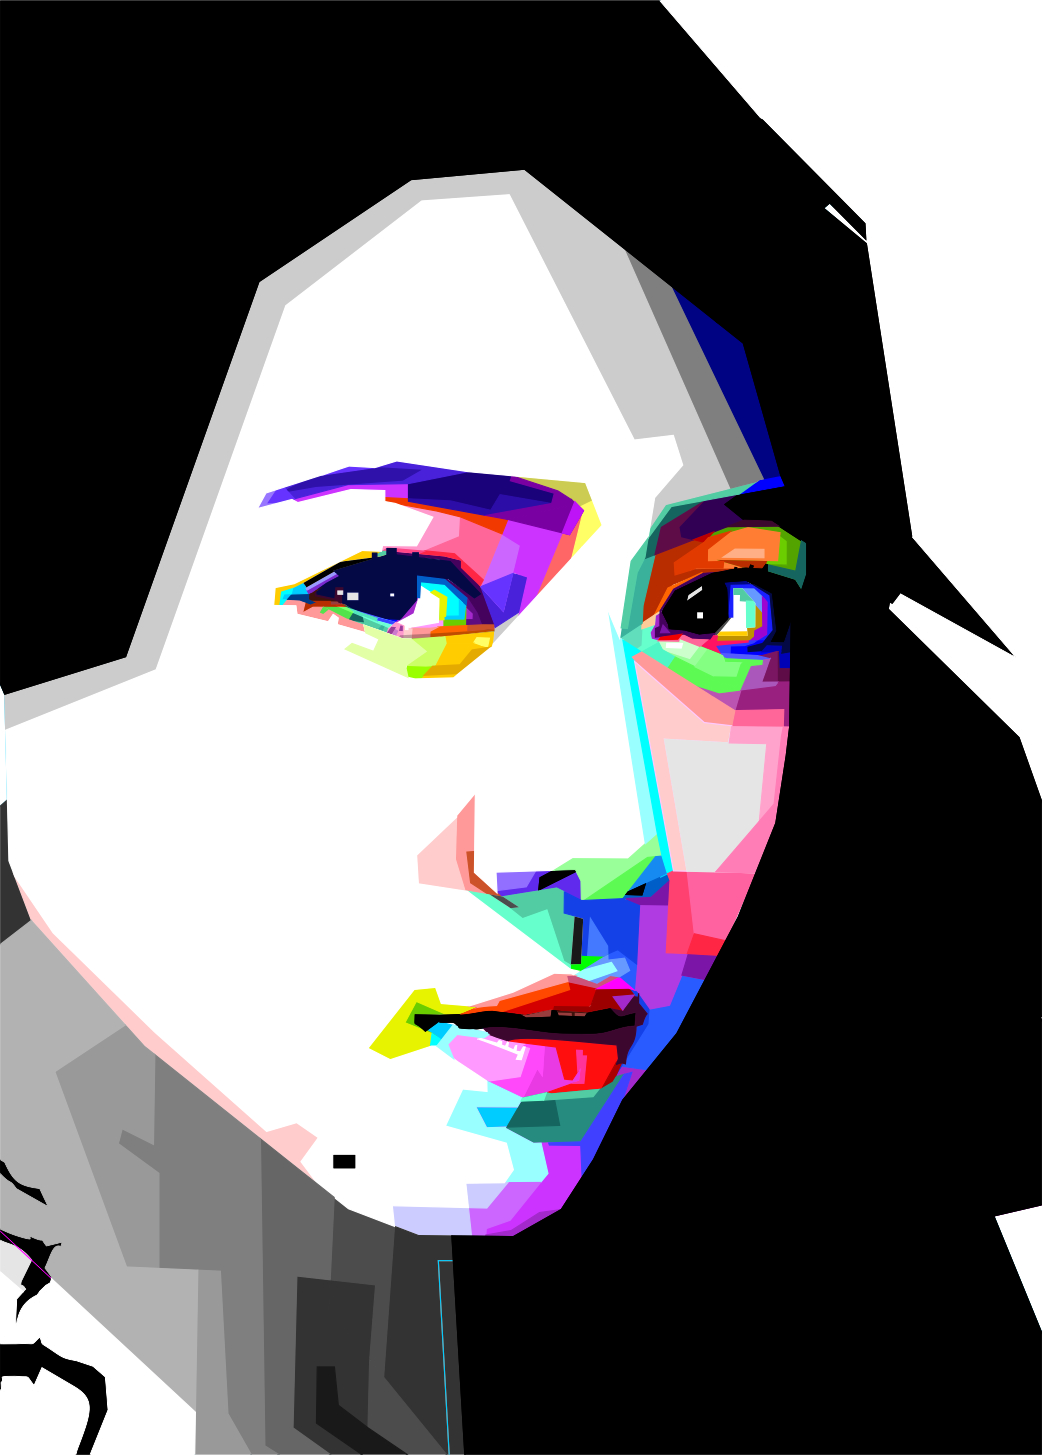 TUTORIAL WPAP COREL DRAW X5. TIPS AND TRICK WPAP: GALLERY 